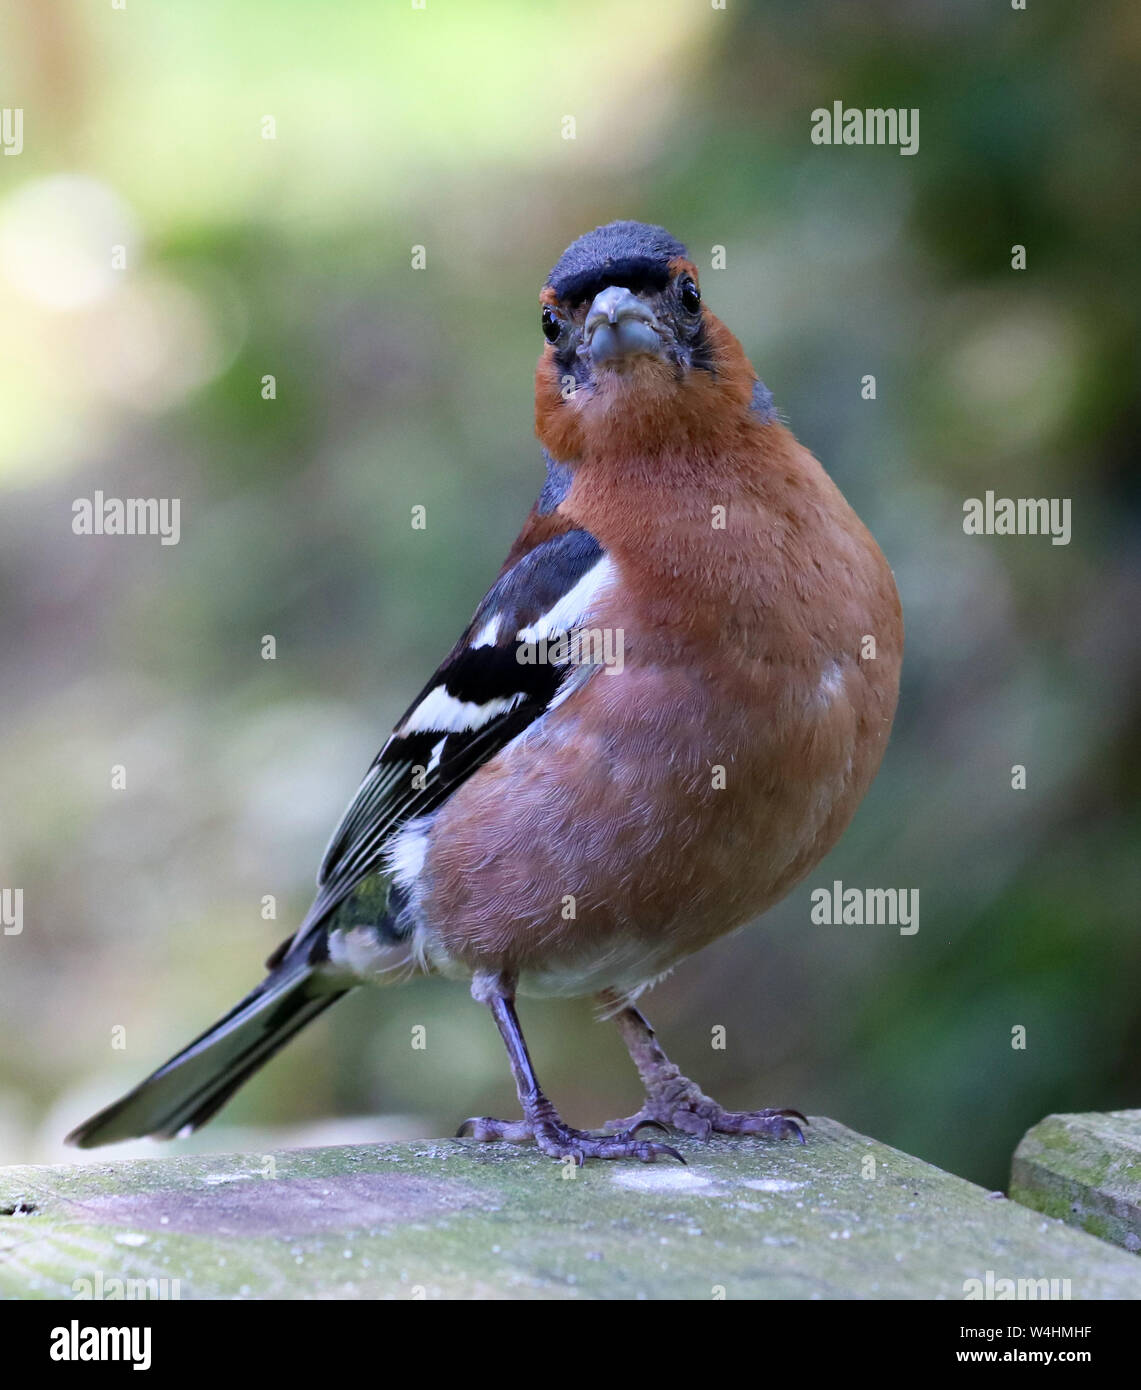 Chaffinch standing facing forward looking forward in close up detail Stock Photo